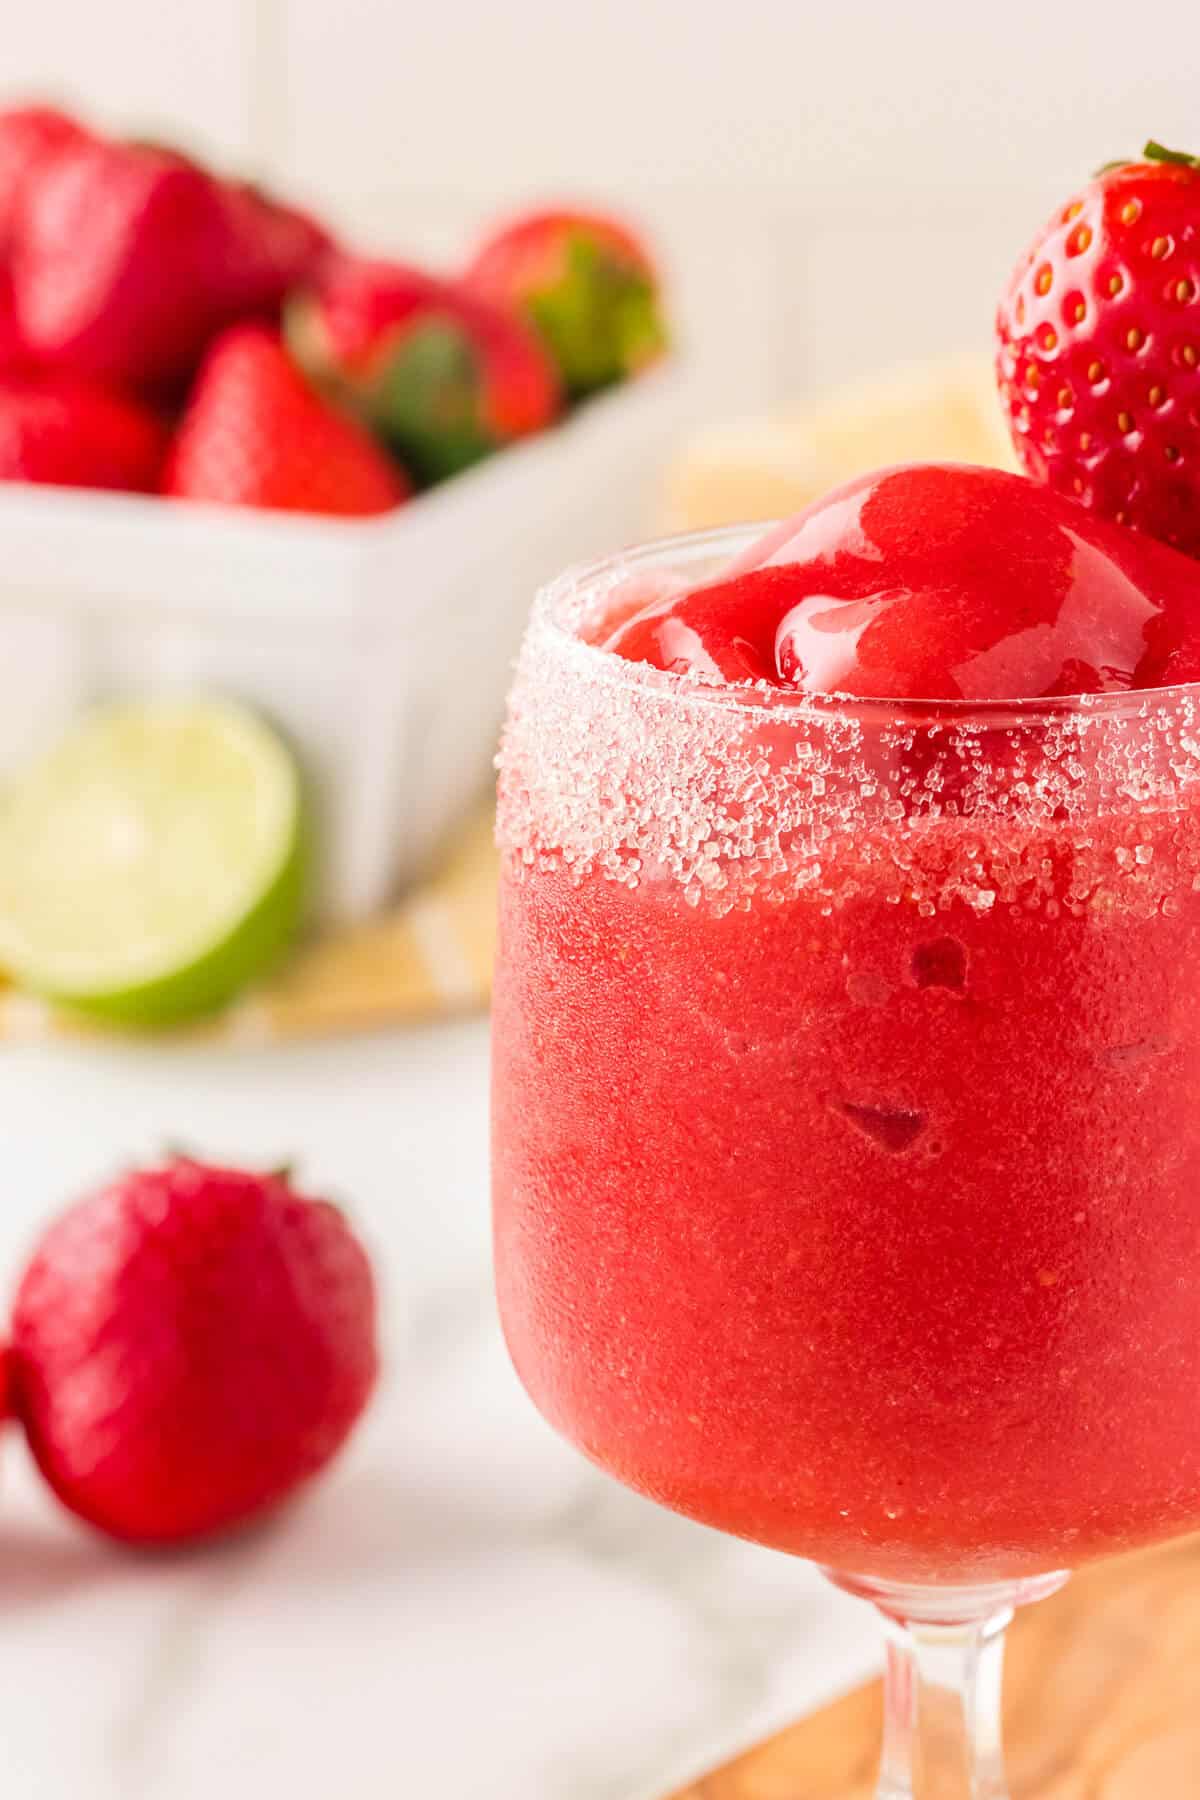 Nonalcoholic frozen strawberry daiquiri in a sugar rimmed glass with strawberries and limes in the background.